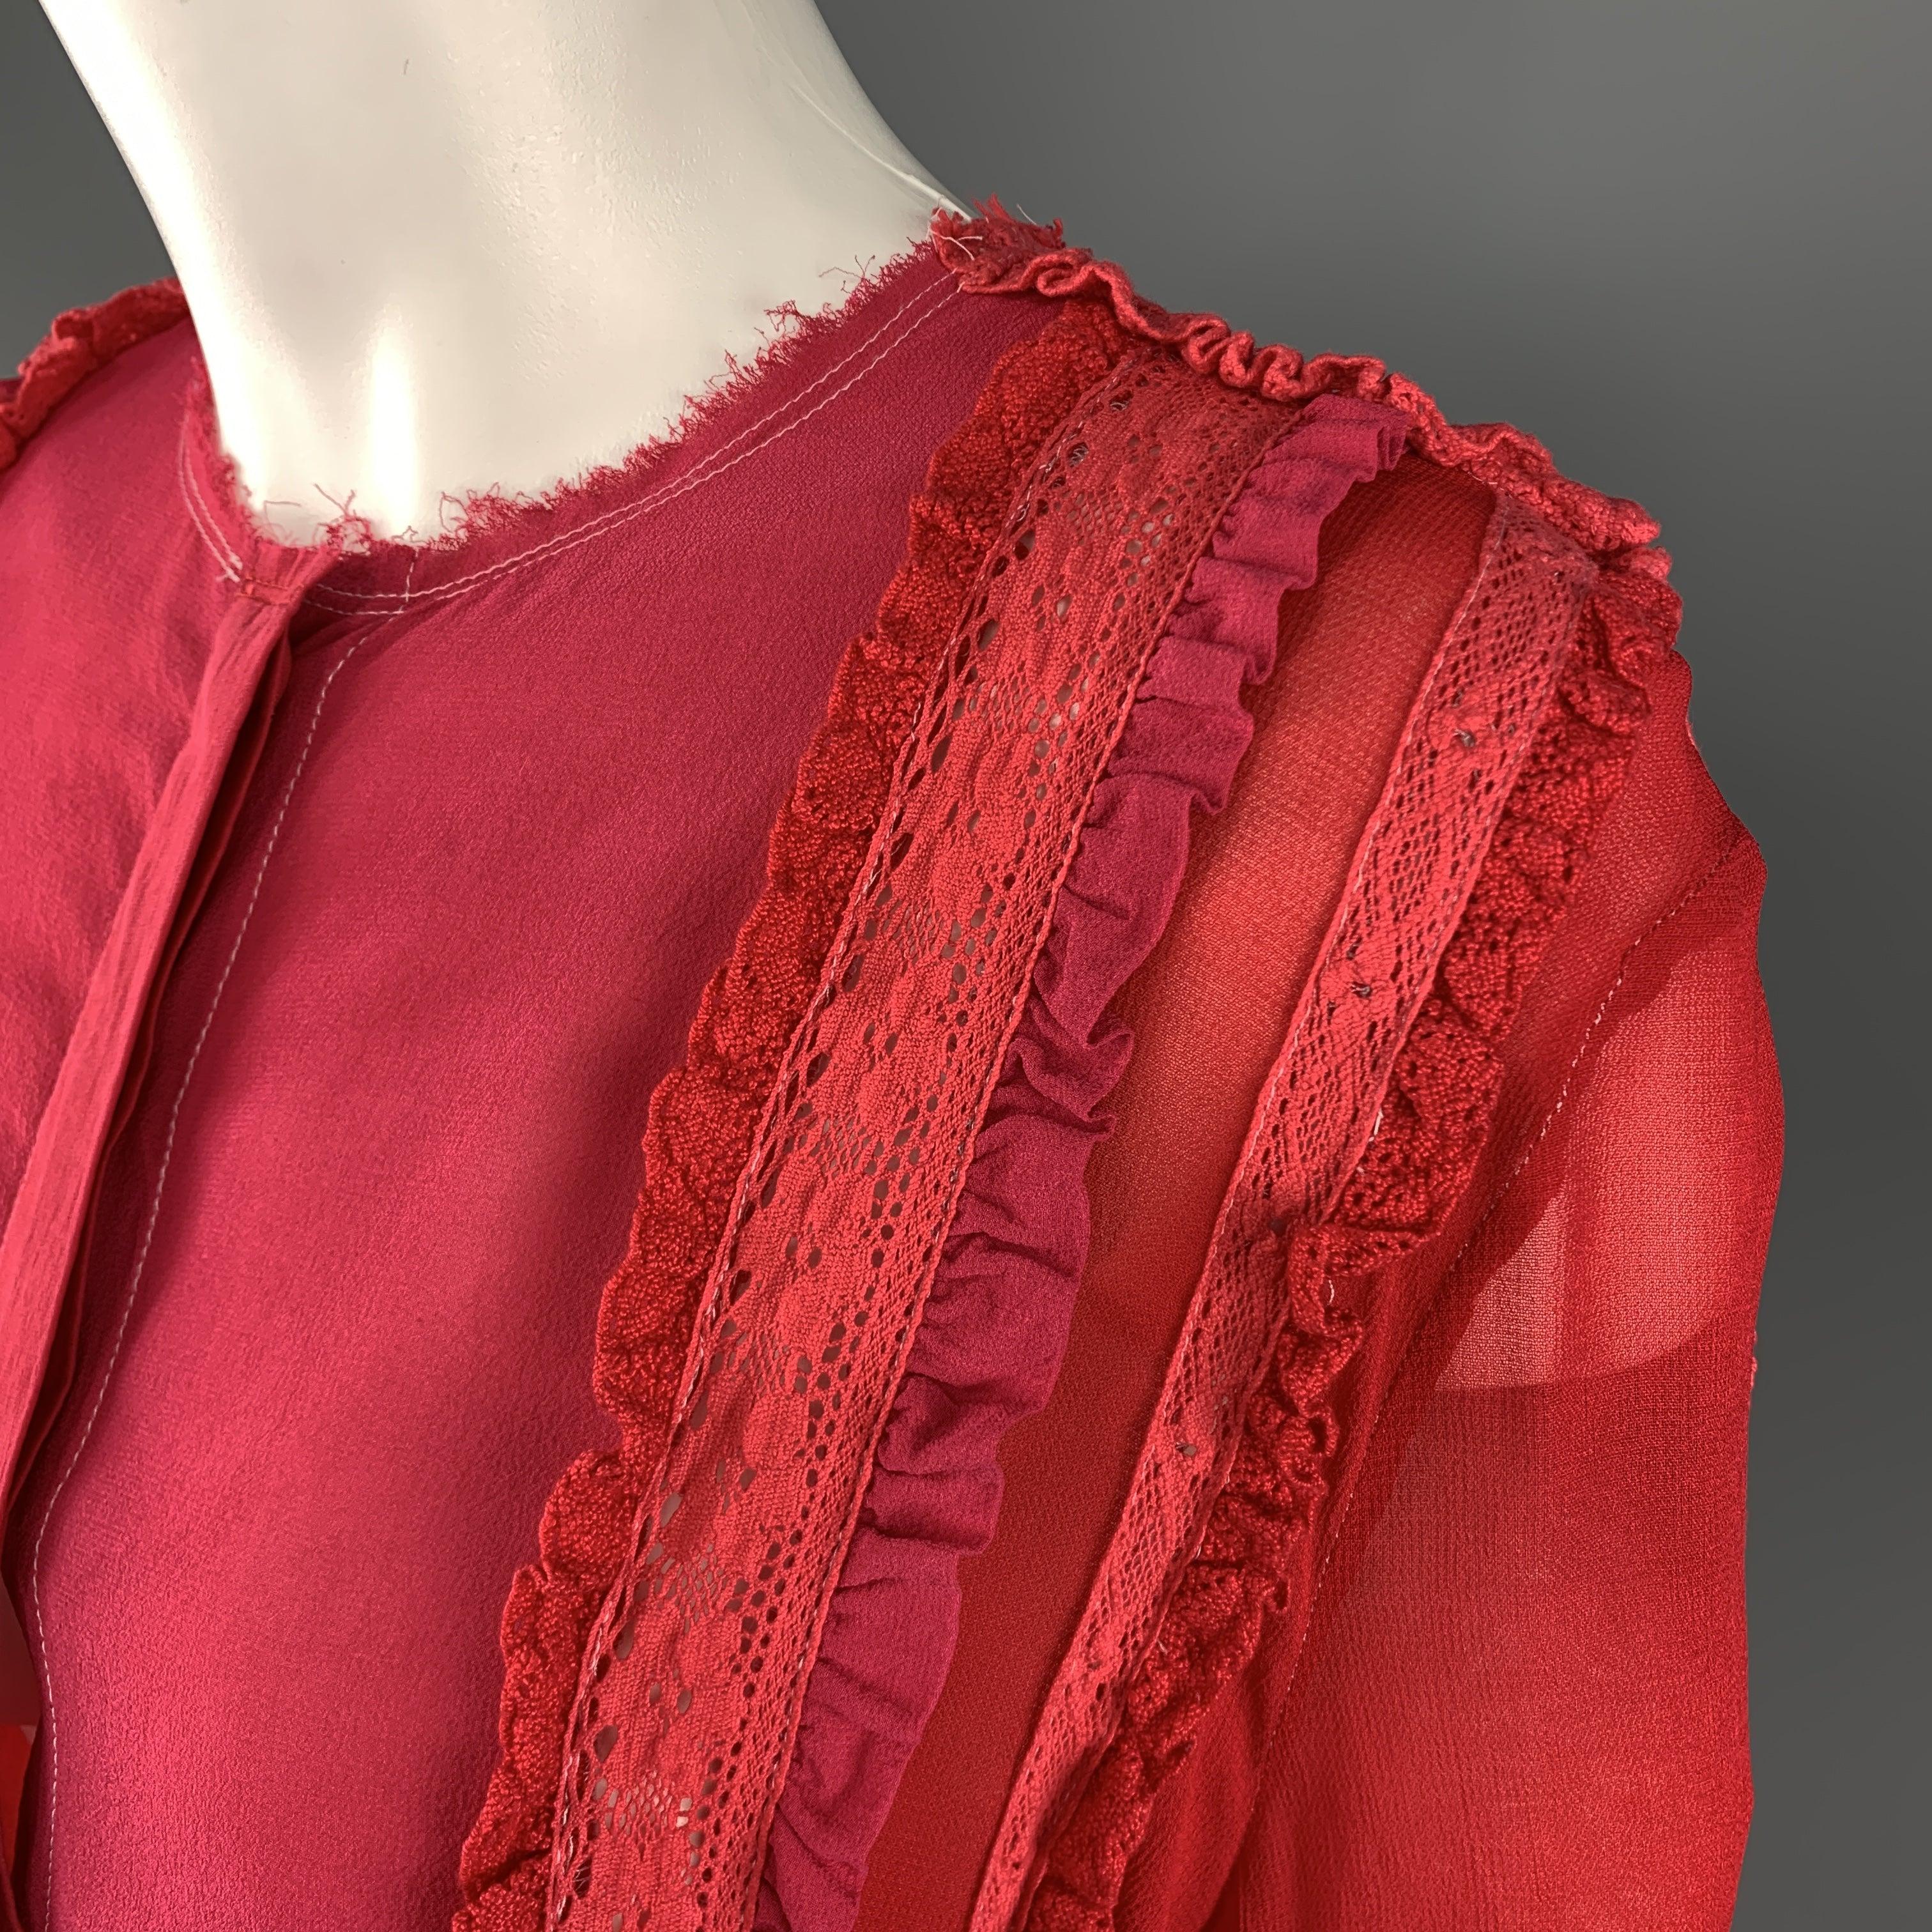 PREEN LINE blouse comes in fuchsia and red color block crepe chiffon with lace knit ruffled piping trim throughout and frayed collarless neckline. 
Excellent Pre-Owned Condition.
 

Marked:   S
 

Measurements: 
  
l	Shoulder: 17 inches 
l	Bust: 44